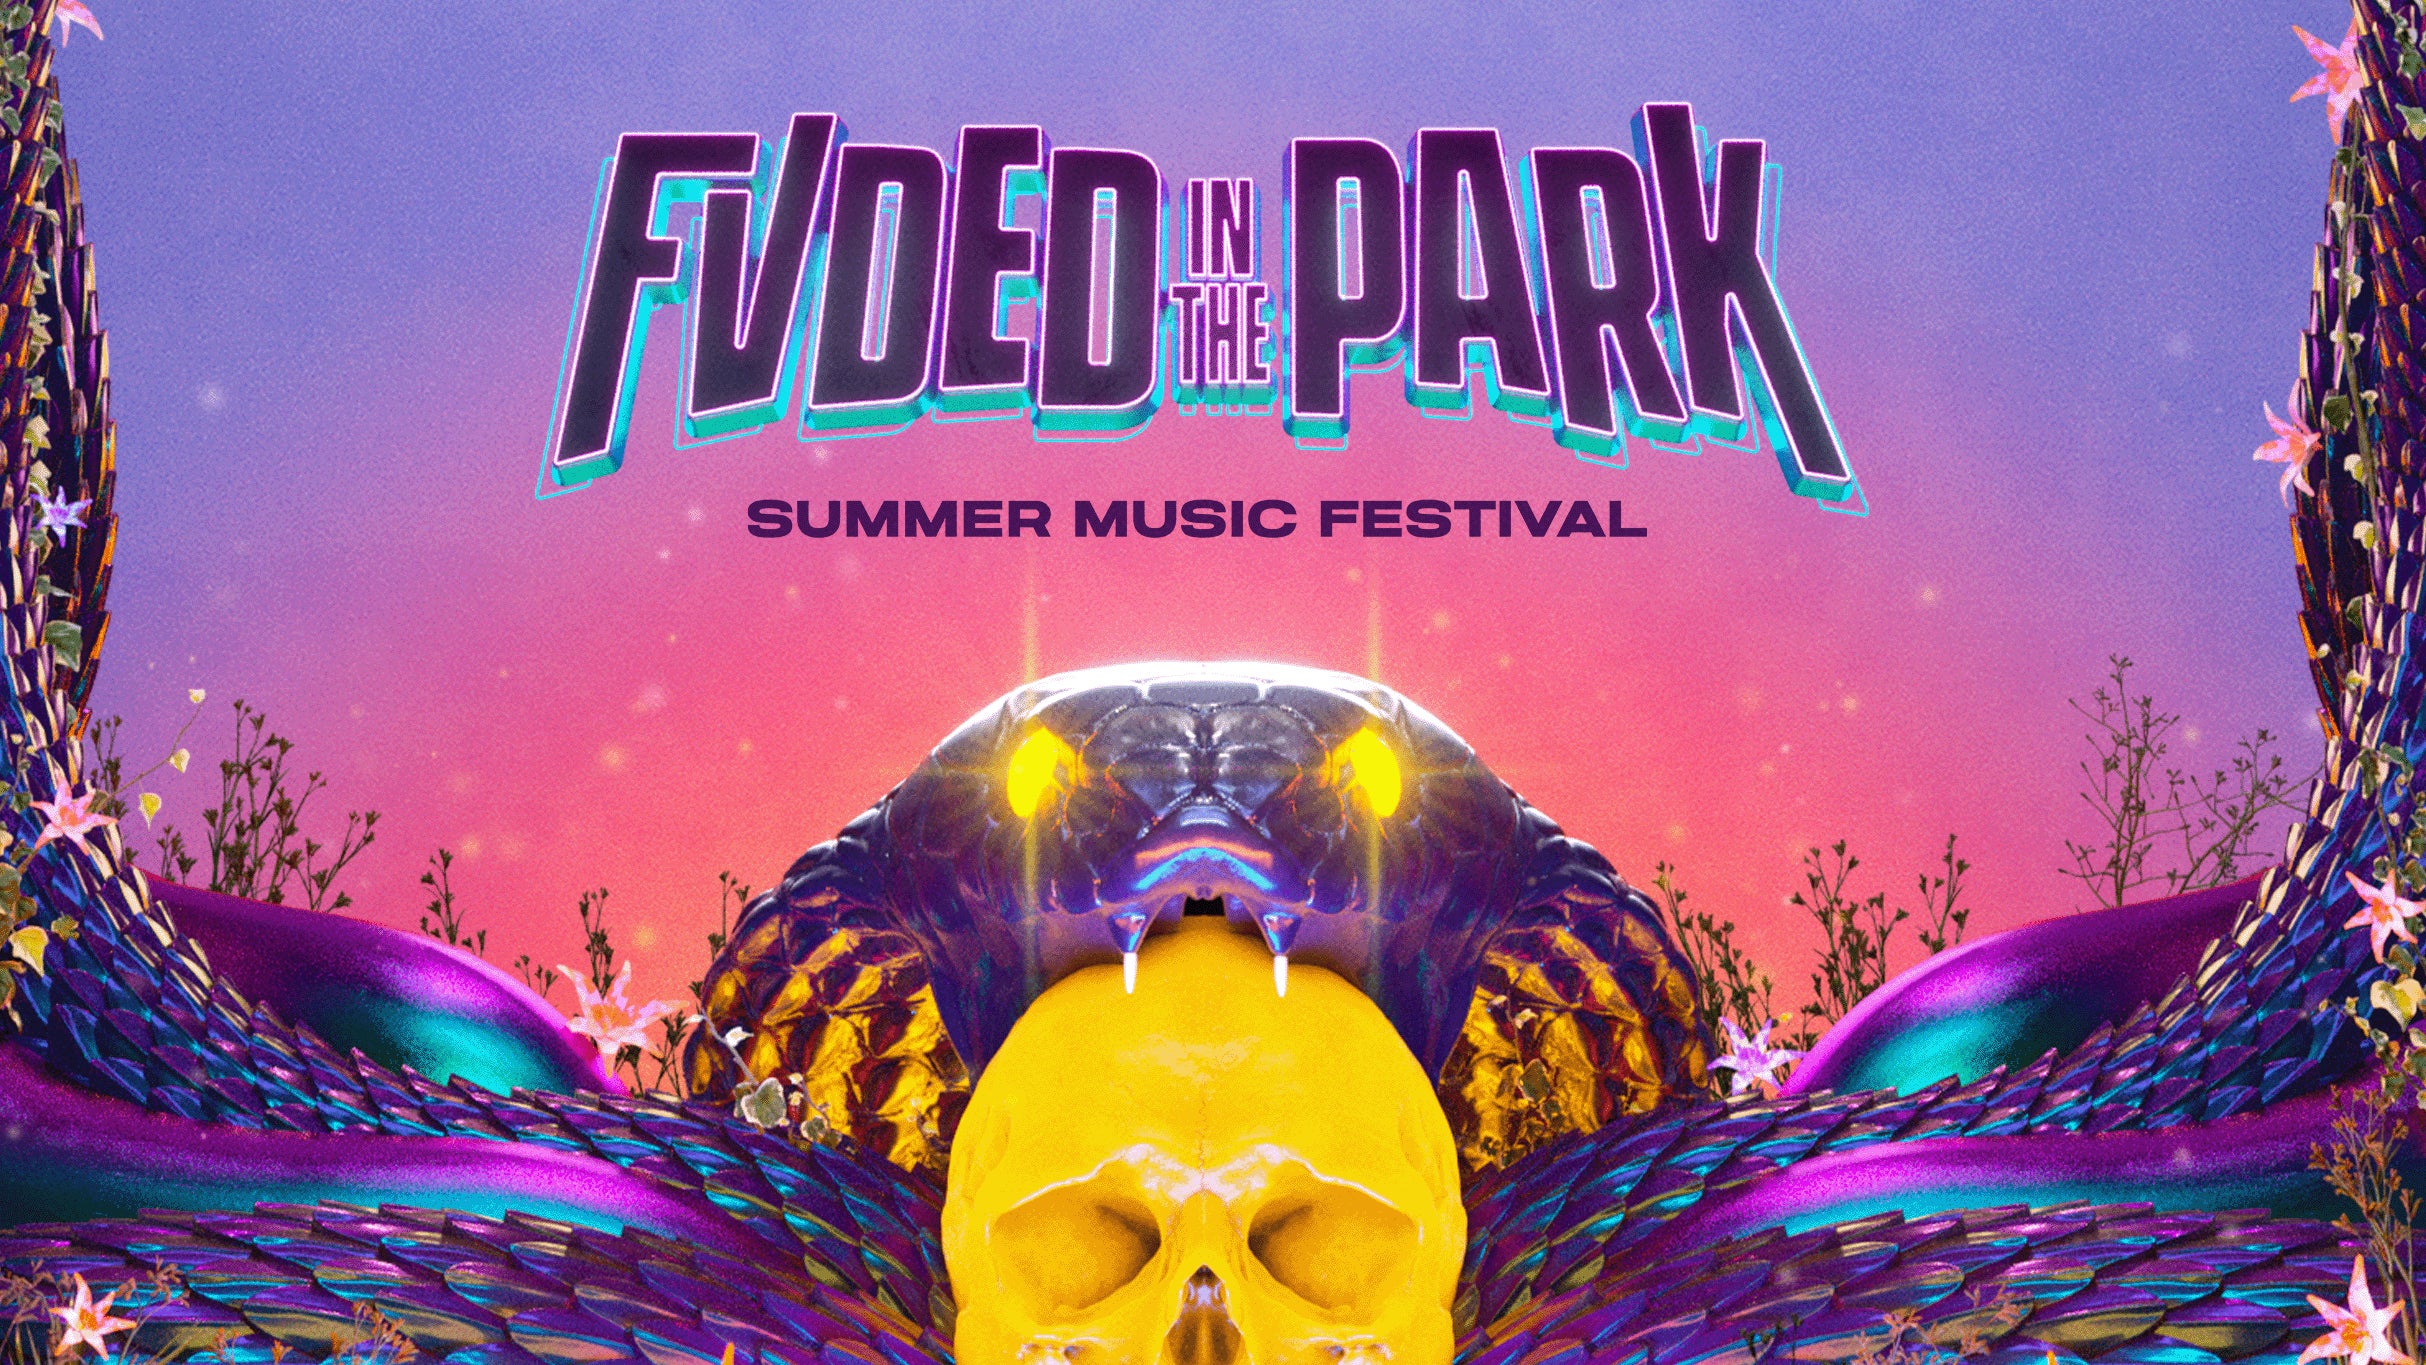 FVDED In the Park free presale password for early tickets in Surrey